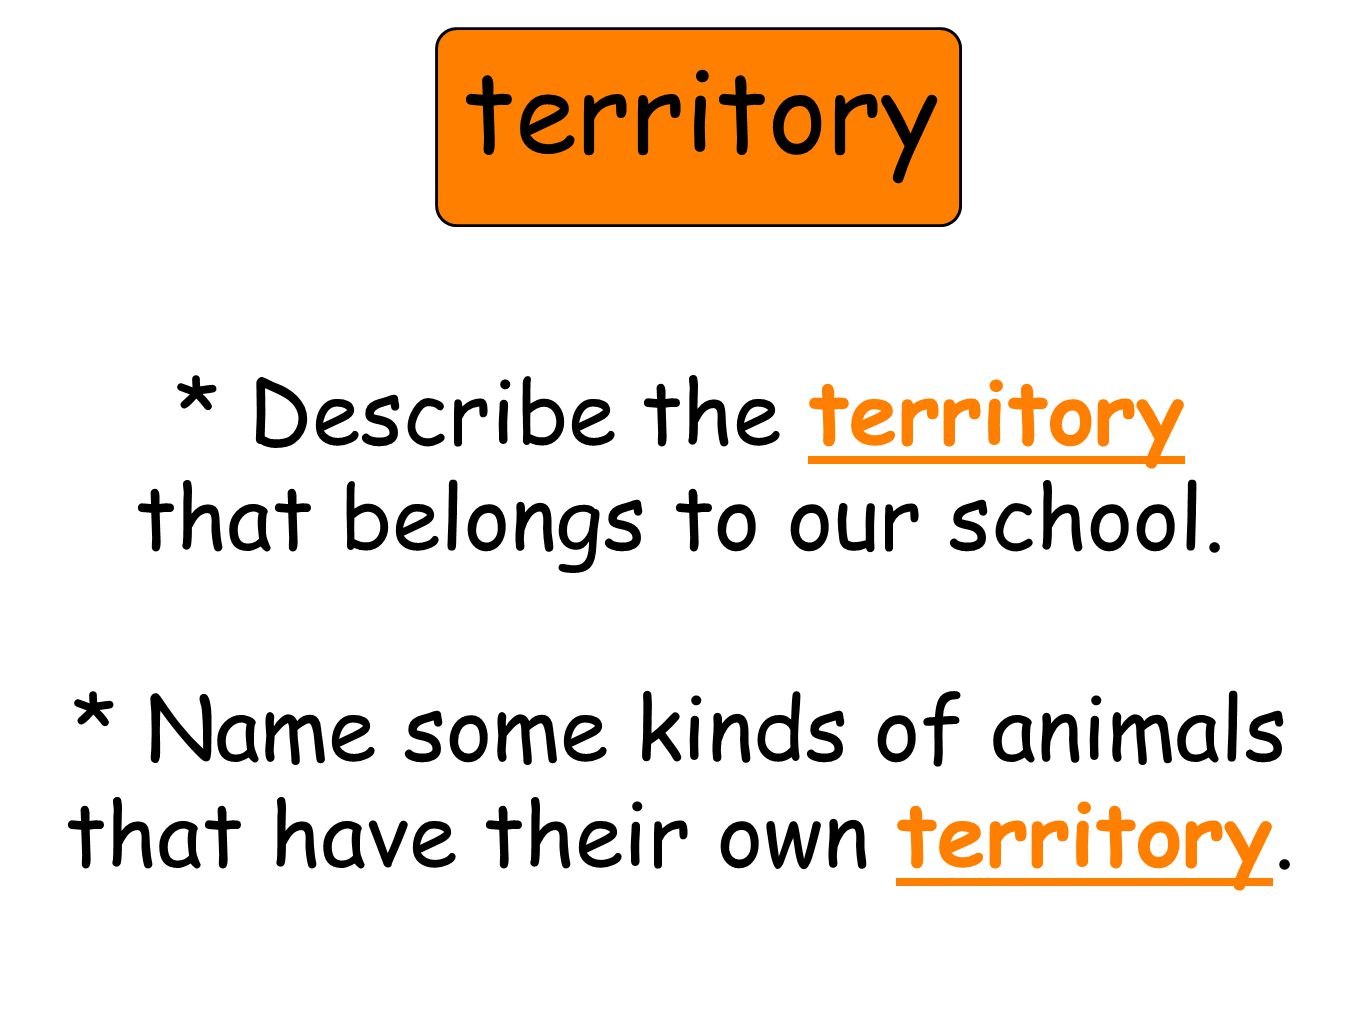 * Describe the territory that belongs to our school.